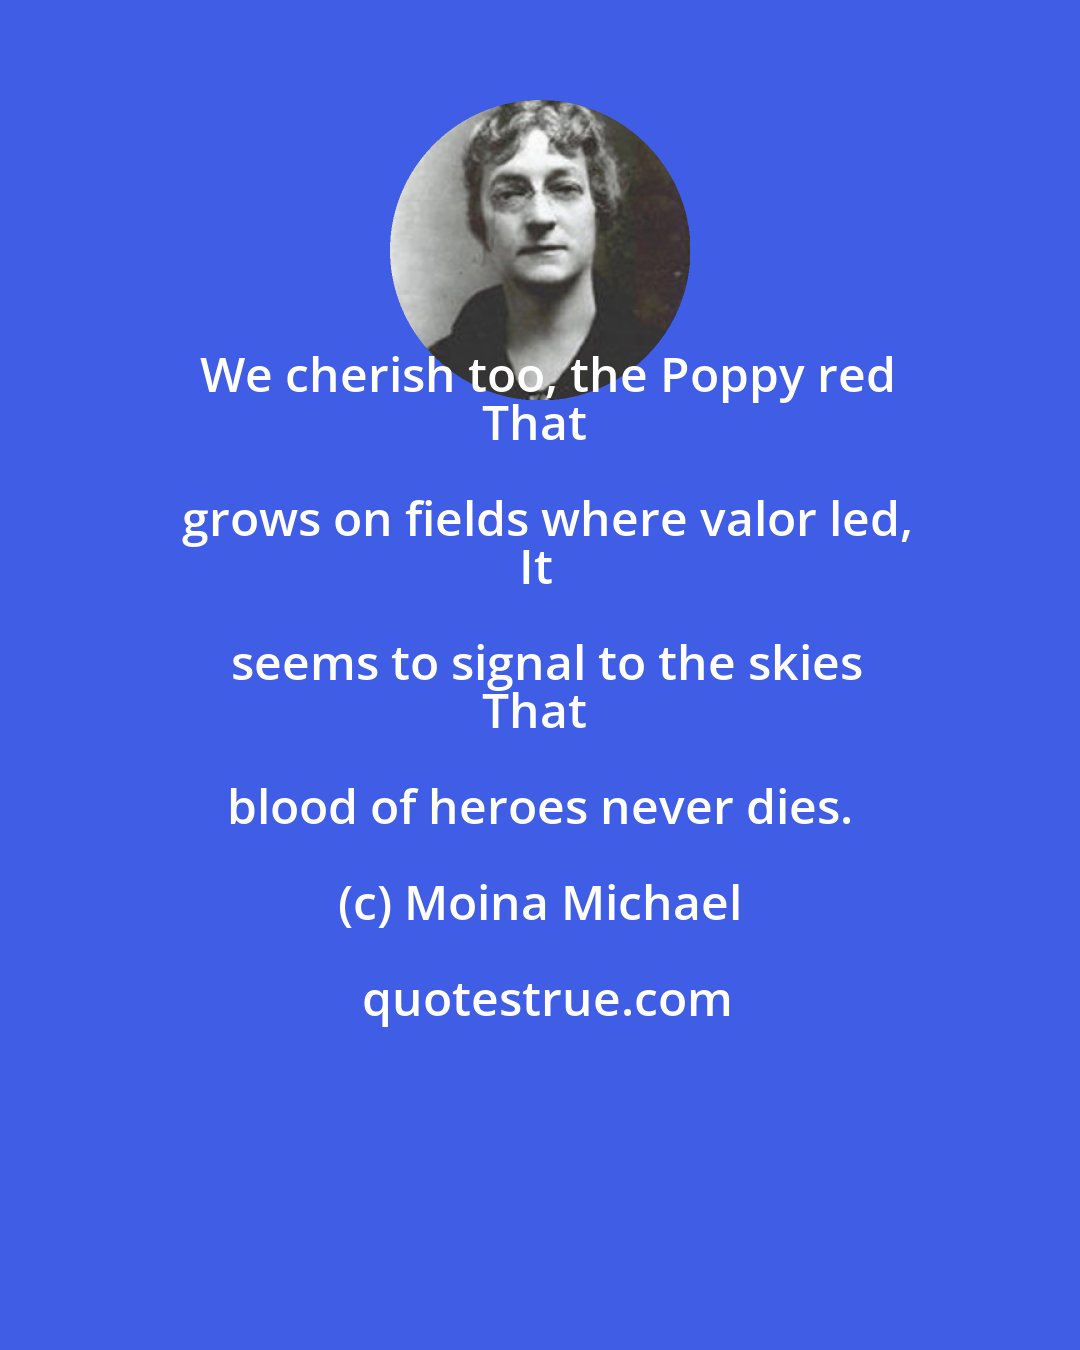 Moina Michael: We cherish too, the Poppy red
That grows on fields where valor led,
It seems to signal to the skies
That blood of heroes never dies.